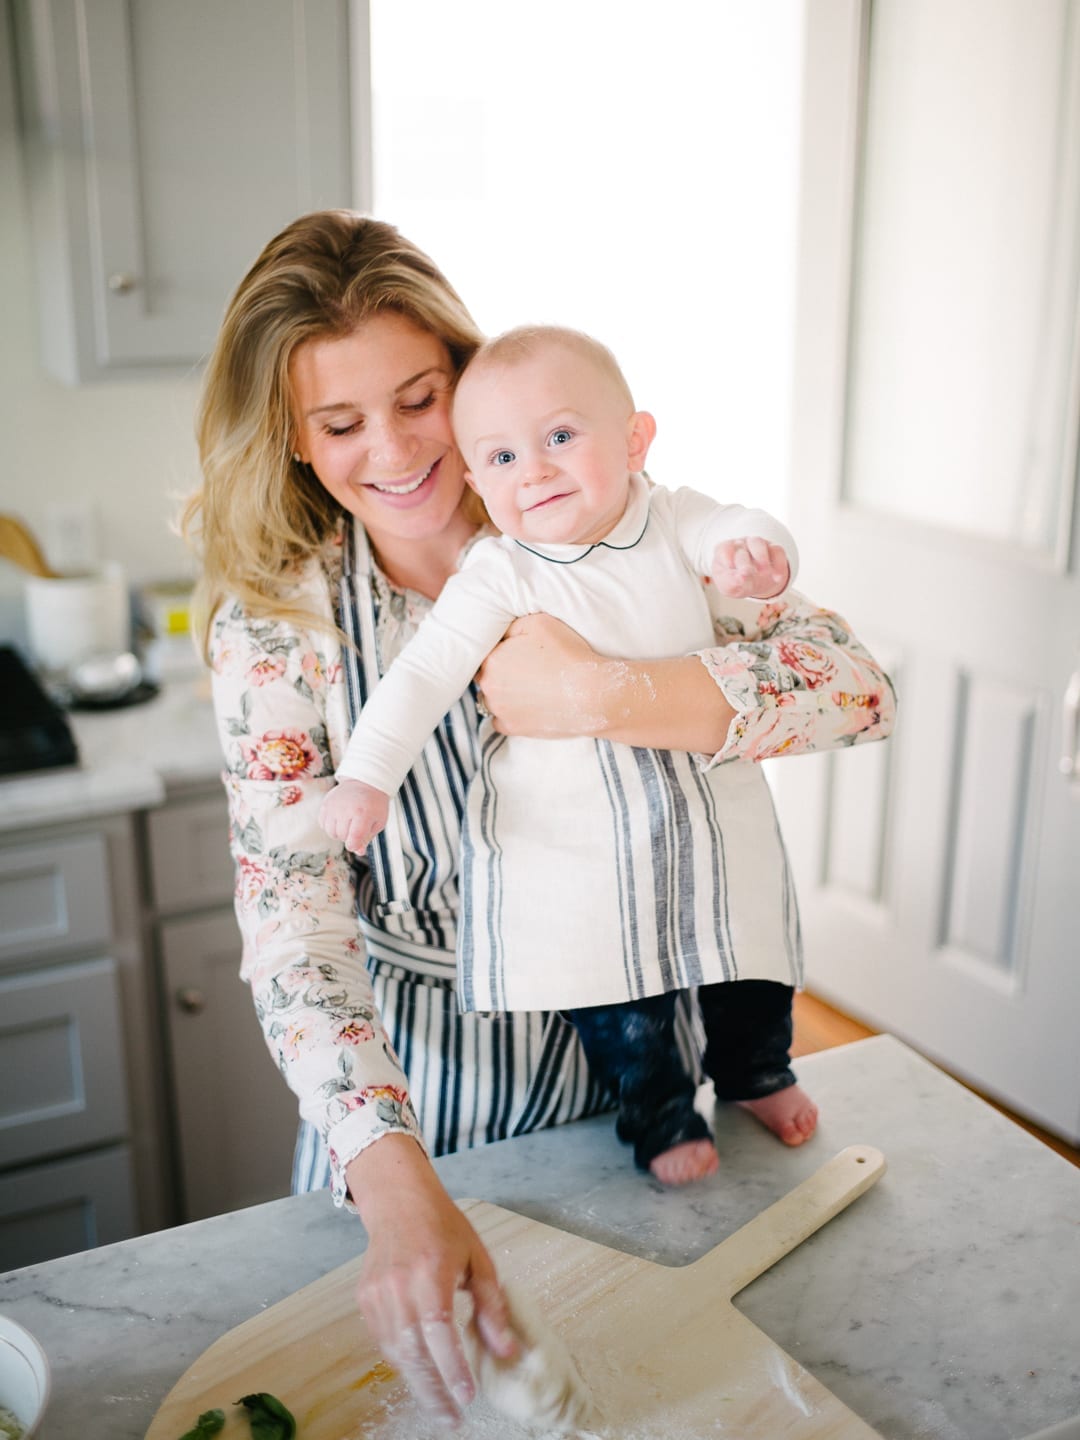 Lucy Cuneo with baby pizza party